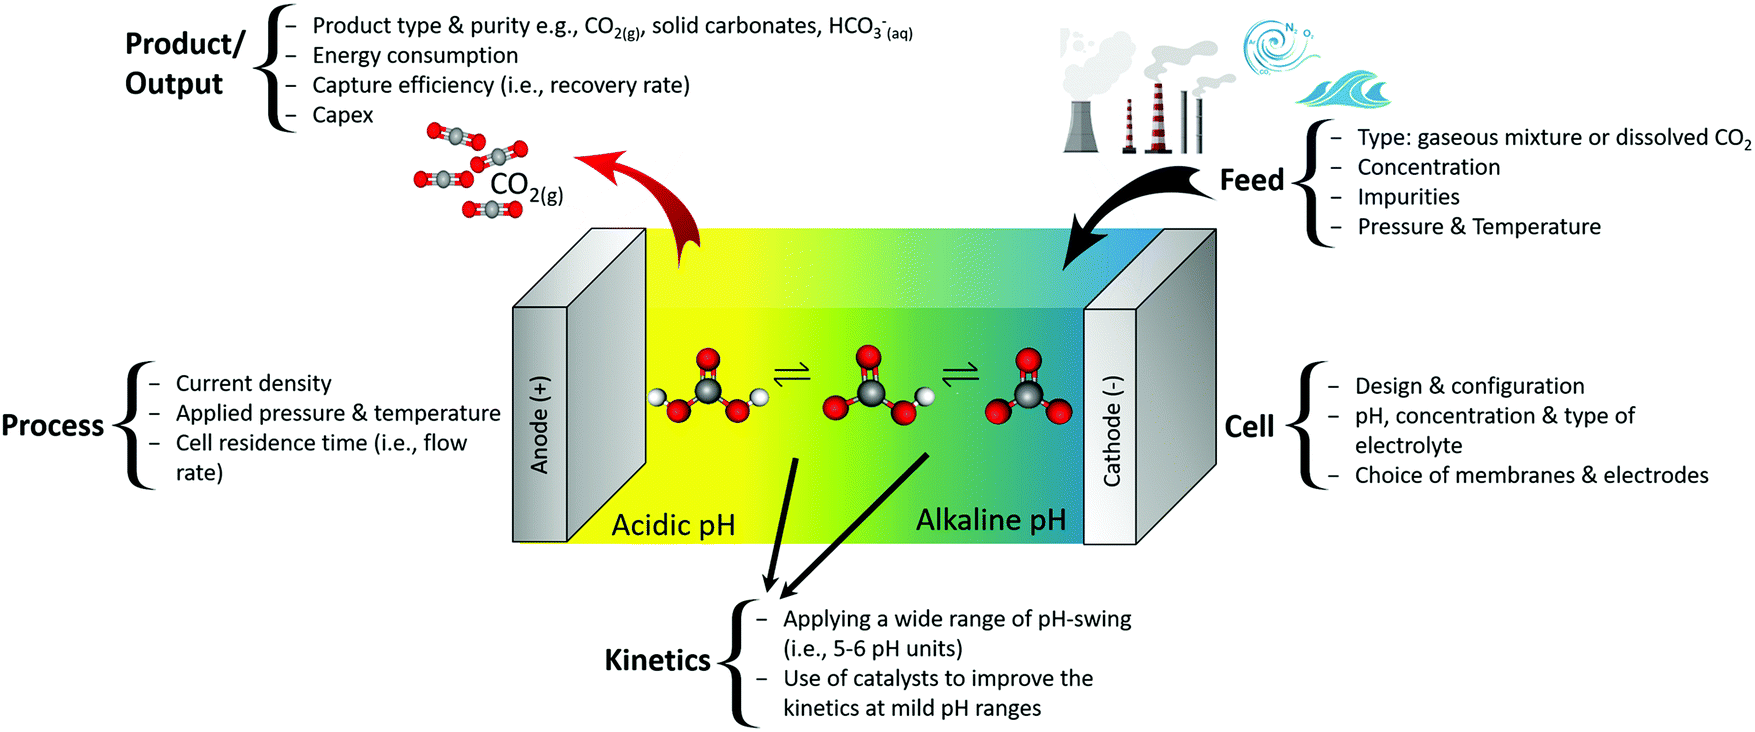 Electrochemical carbon dioxide capture to close the carbon cycle - Energy &  Environmental Science (RSC Publishing) DOI:10.1039/D0EE03382K